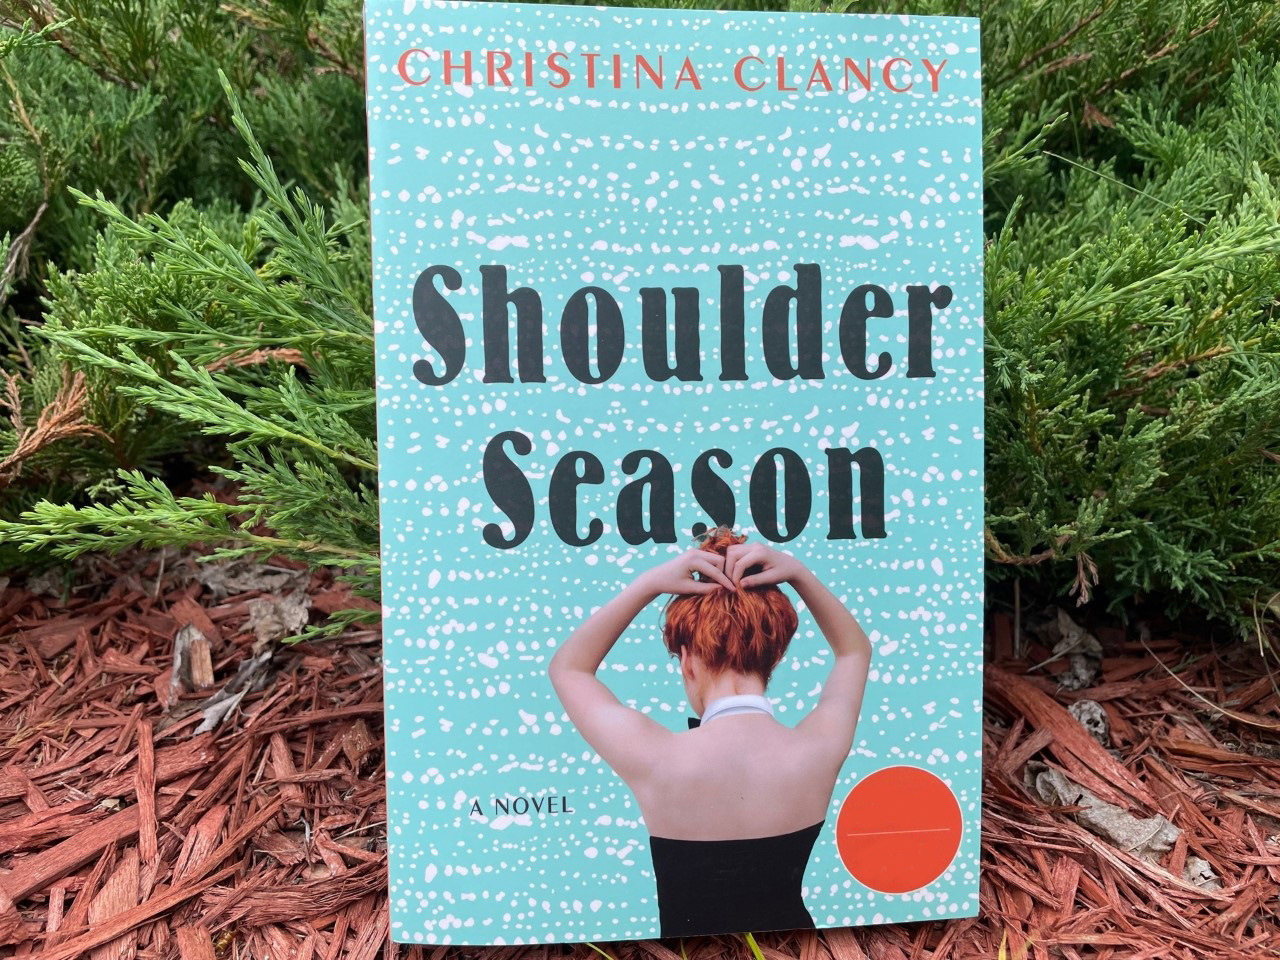 Madison Author Christina Clancy's novel "Shoulder Season" was released in July 2021. Although a work of fiction, it takes place at the historic former Playboy Club Hotel in Lake Geneva. (Maureen McCollum/WPR)